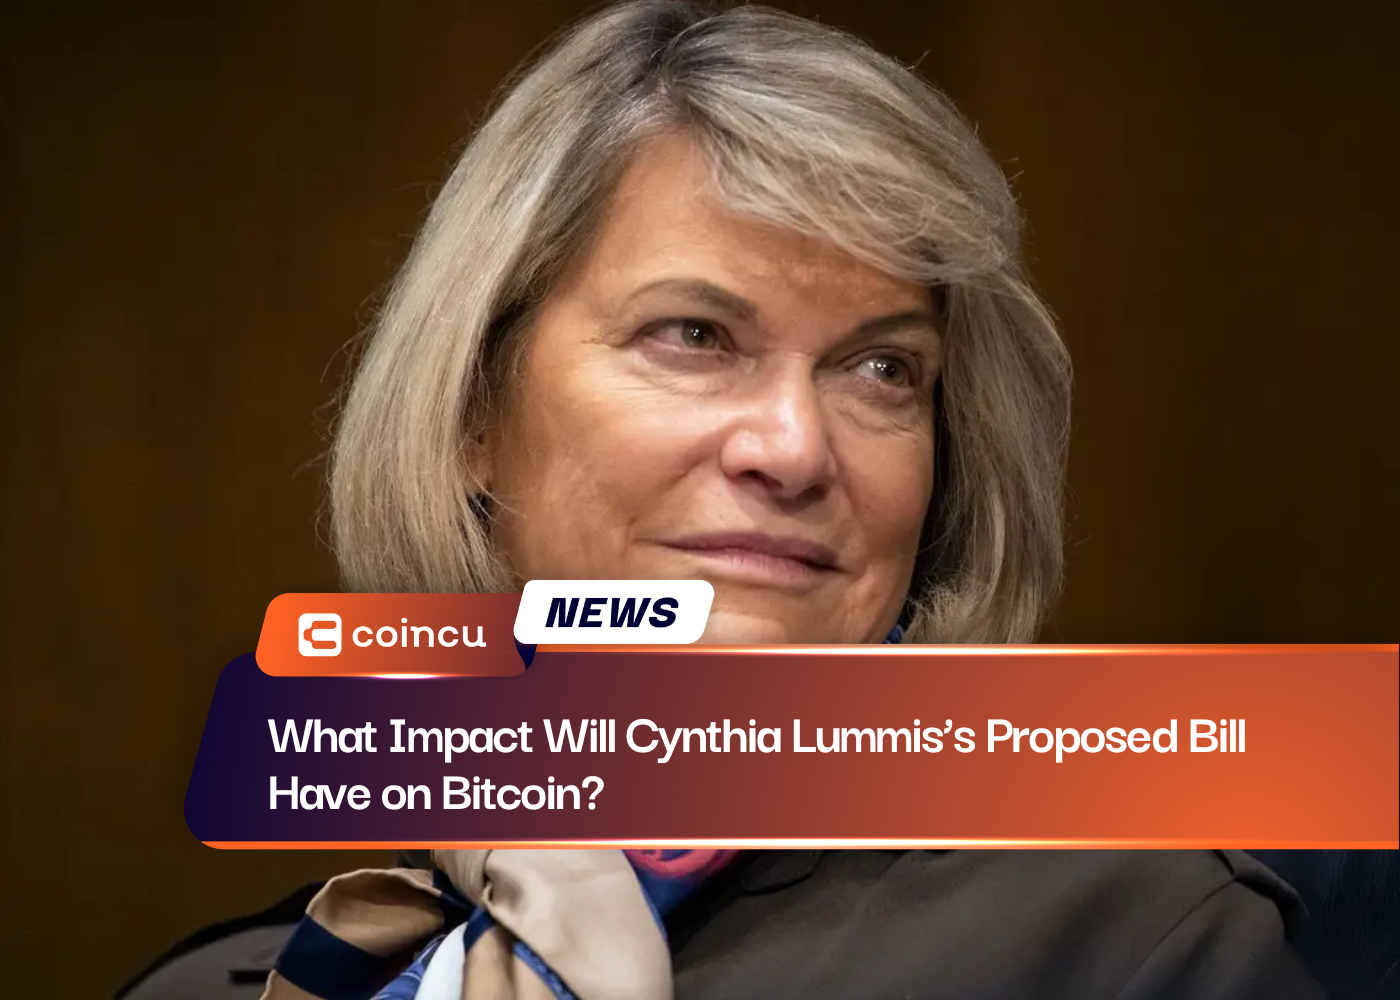 What Impact Will Cynthia Lummis’s Proposed Bill Have on Bitcoin?